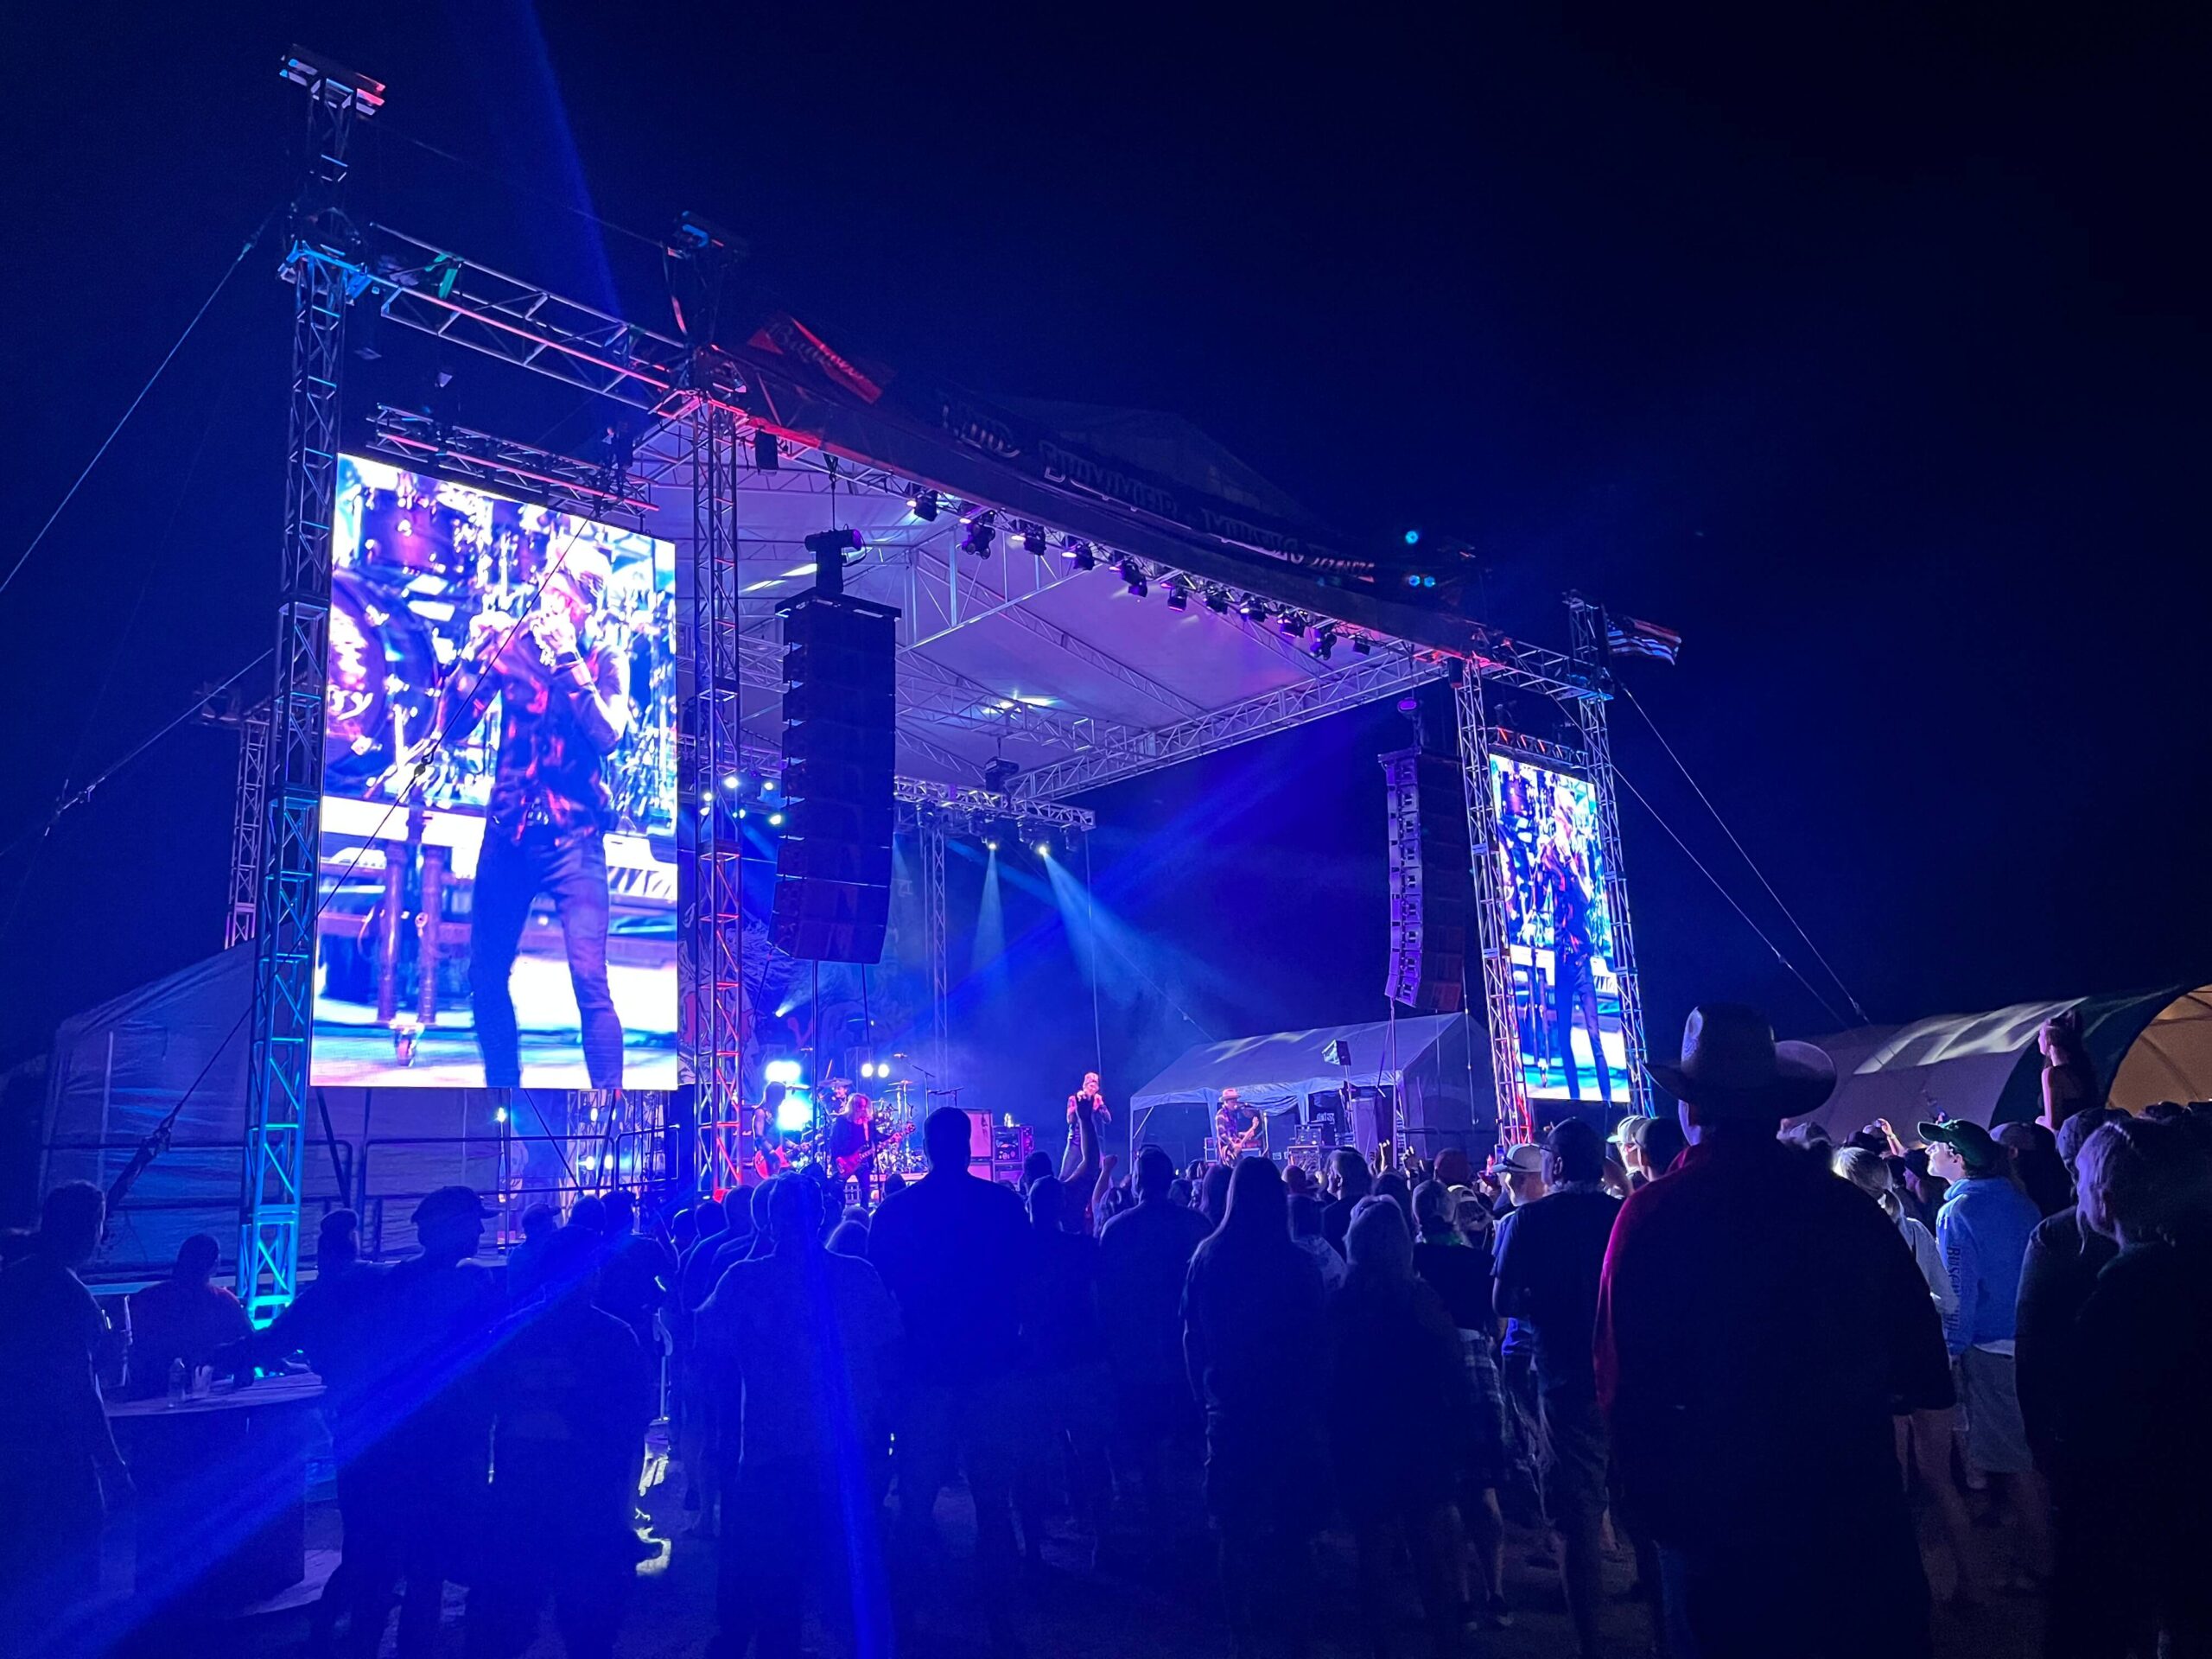 Mobile professional concert equipment rental services: A wide range of audio, lighting, and stage equipment available for rent, with a focus on high-quality gear for concerts and events